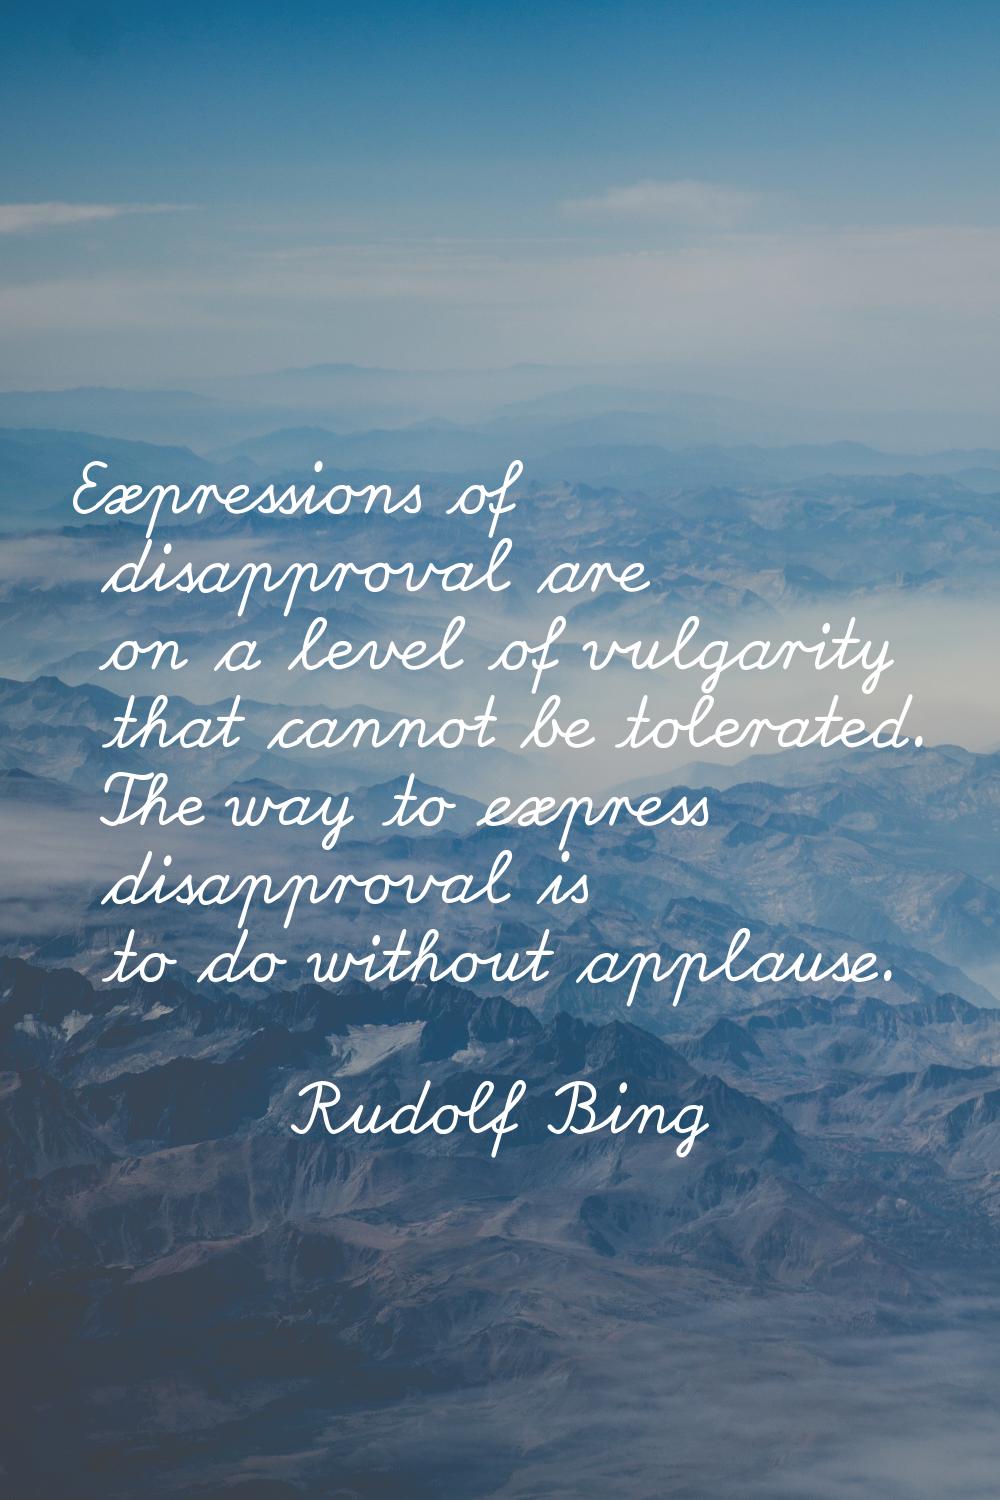 Expressions of disapproval are on a level of vulgarity that cannot be tolerated. The way to express